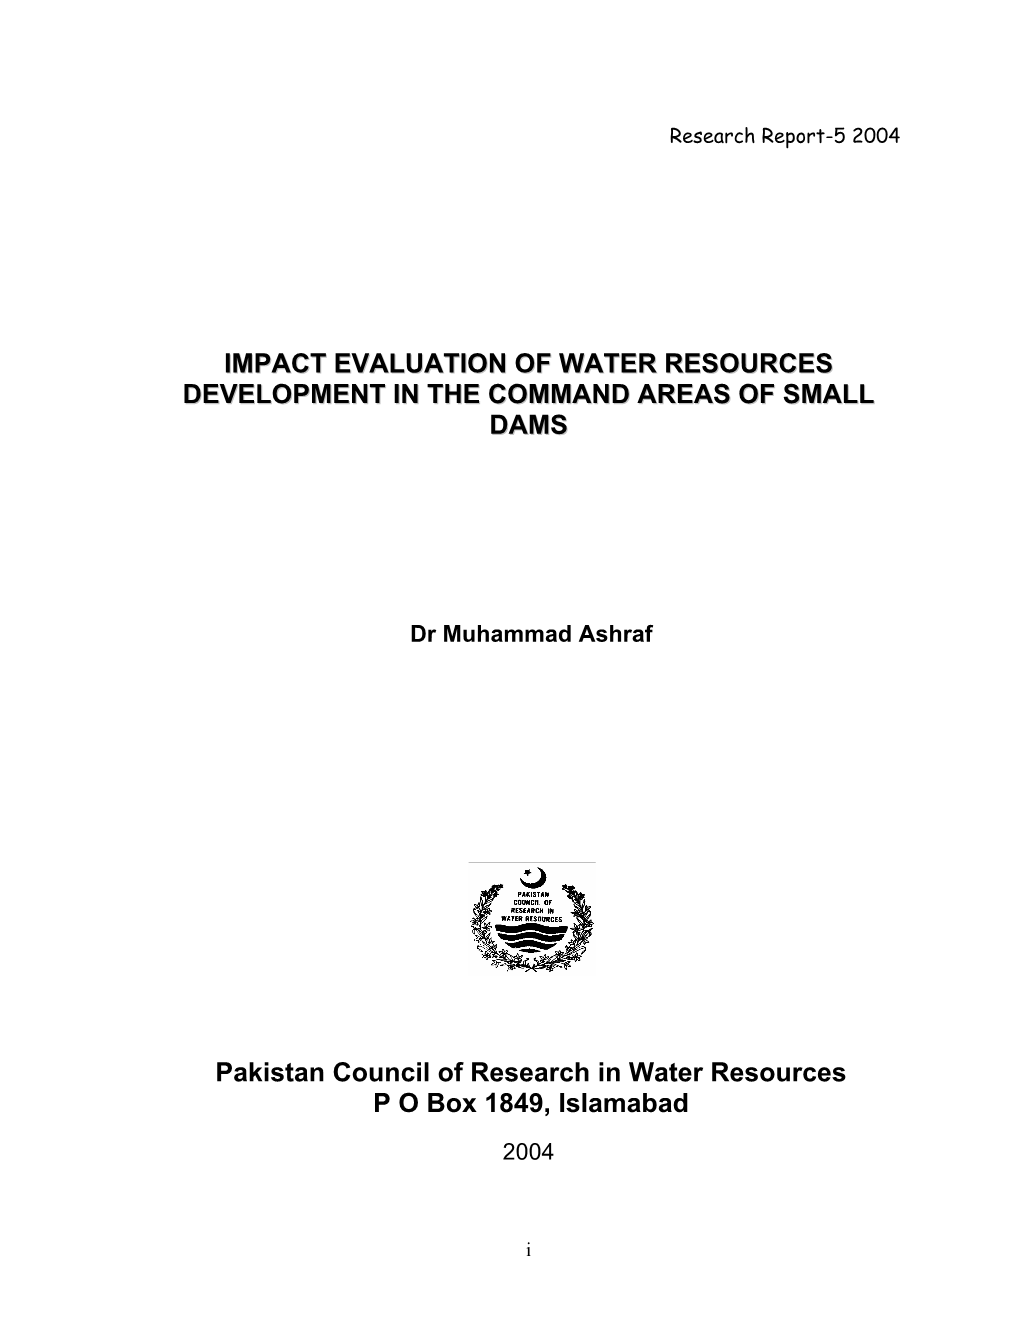 Impact Evaluation of Water Resources Development in the Command Areas of Small Dams